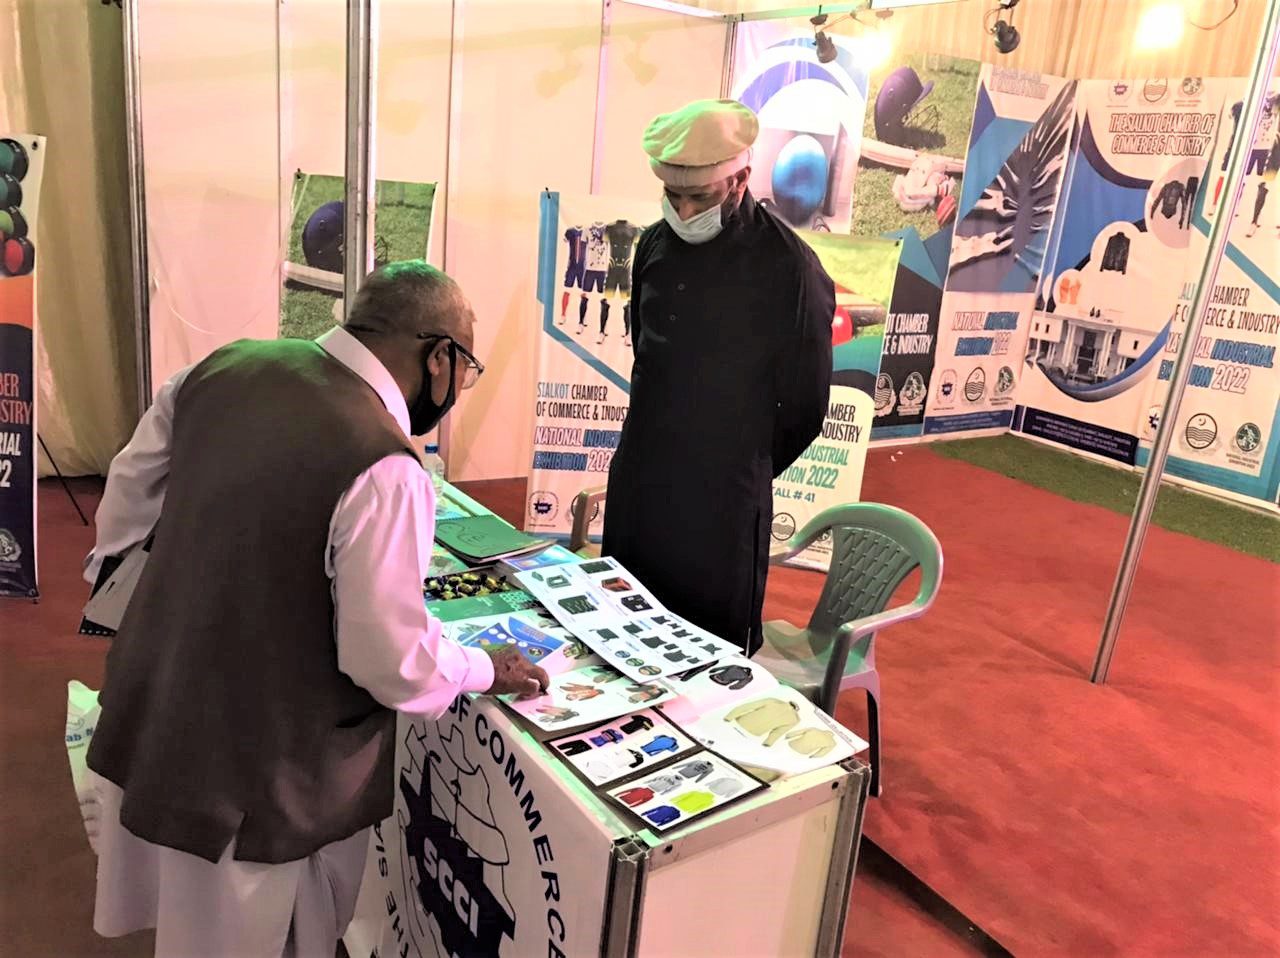 Sialkot Chamber of Commerce & Industry set up the Trade Booth Display at “National Industrial Exhibition 2022” from  March 10-12, 2022 at Fortress Stadium Lahore.